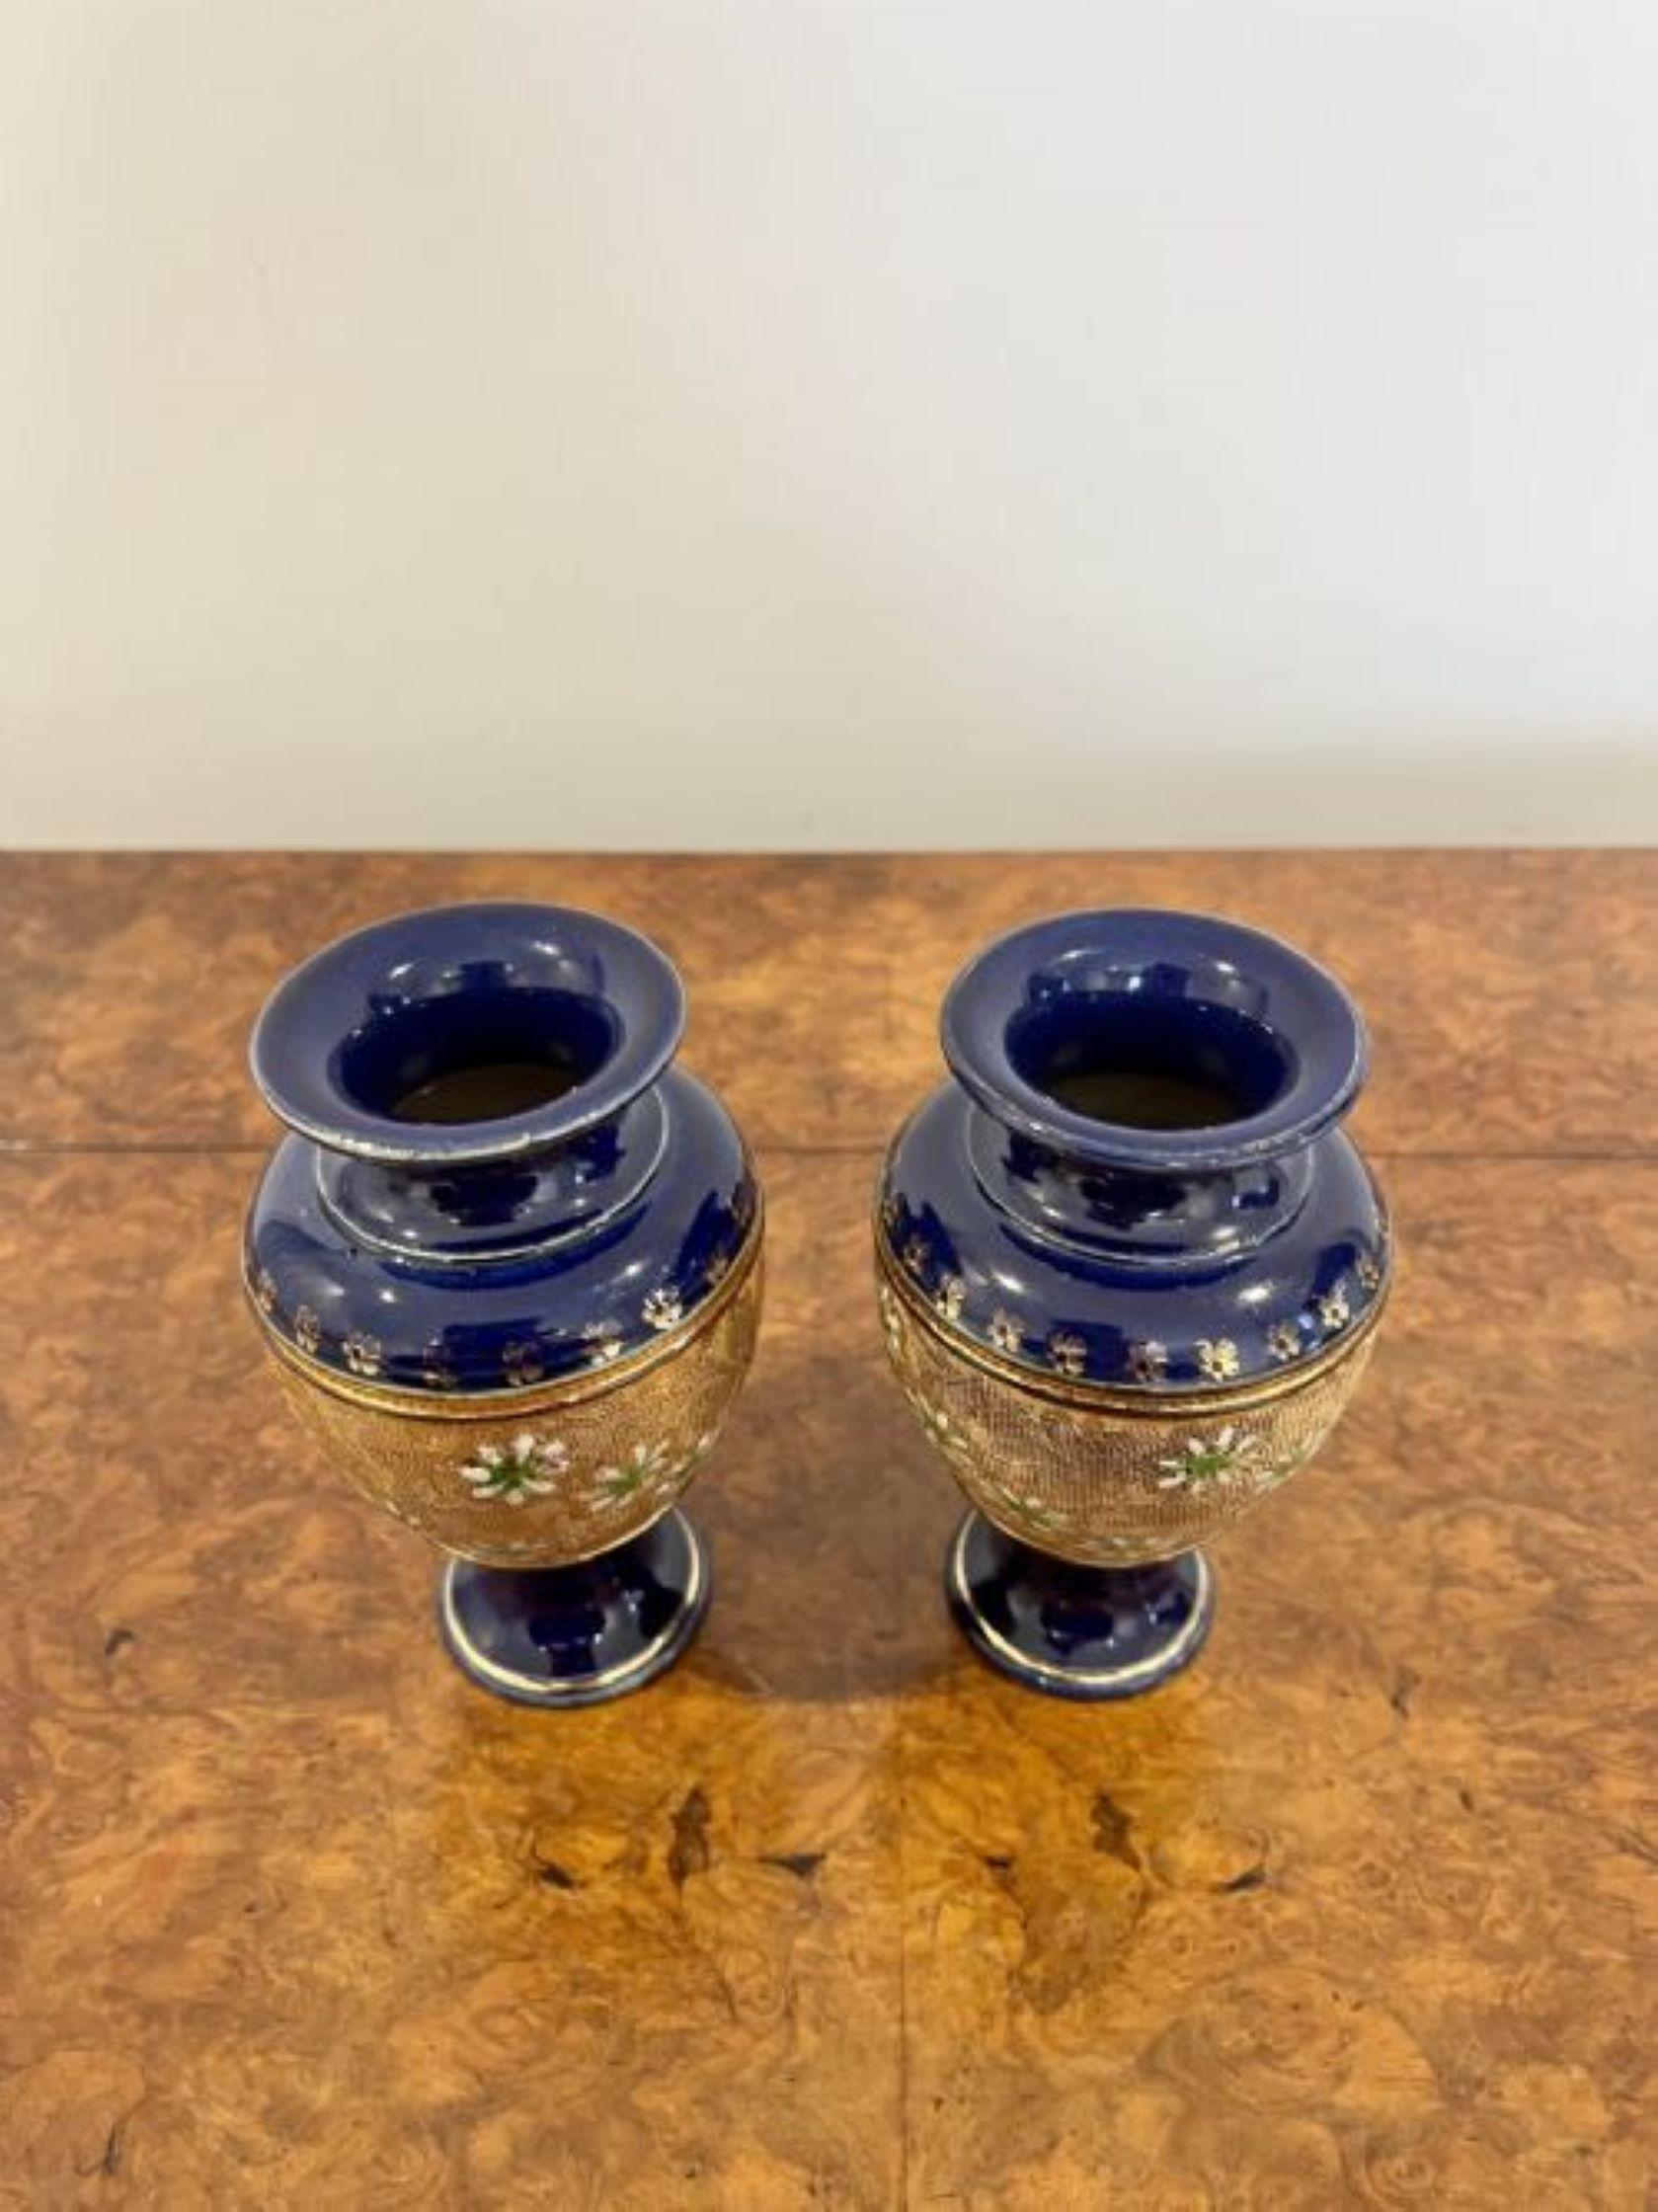 Lovely small pair of antique Victorian Royal Doulton vases having a lovely pair of small antique Royal Doulton vases having a band of green and white flowers on a golden background to the centre of the vase and a dark blue glaze with gold decoration